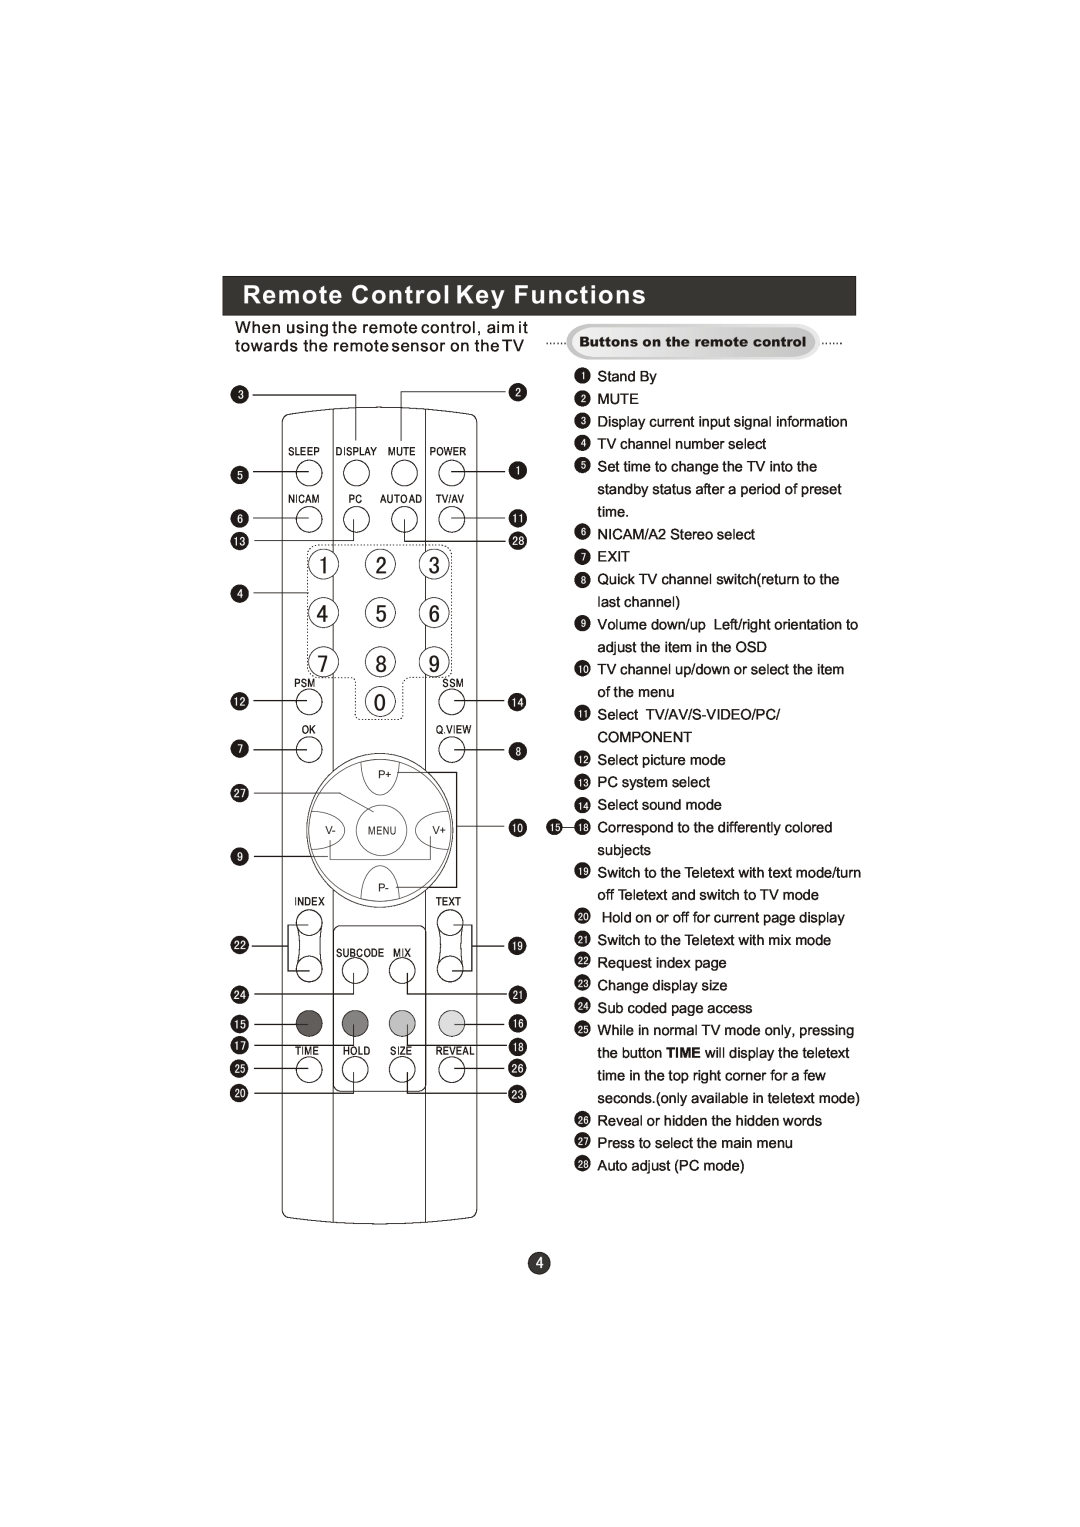 Haier WL22T1, WL19T1 user manual Remote Control Key Functions 